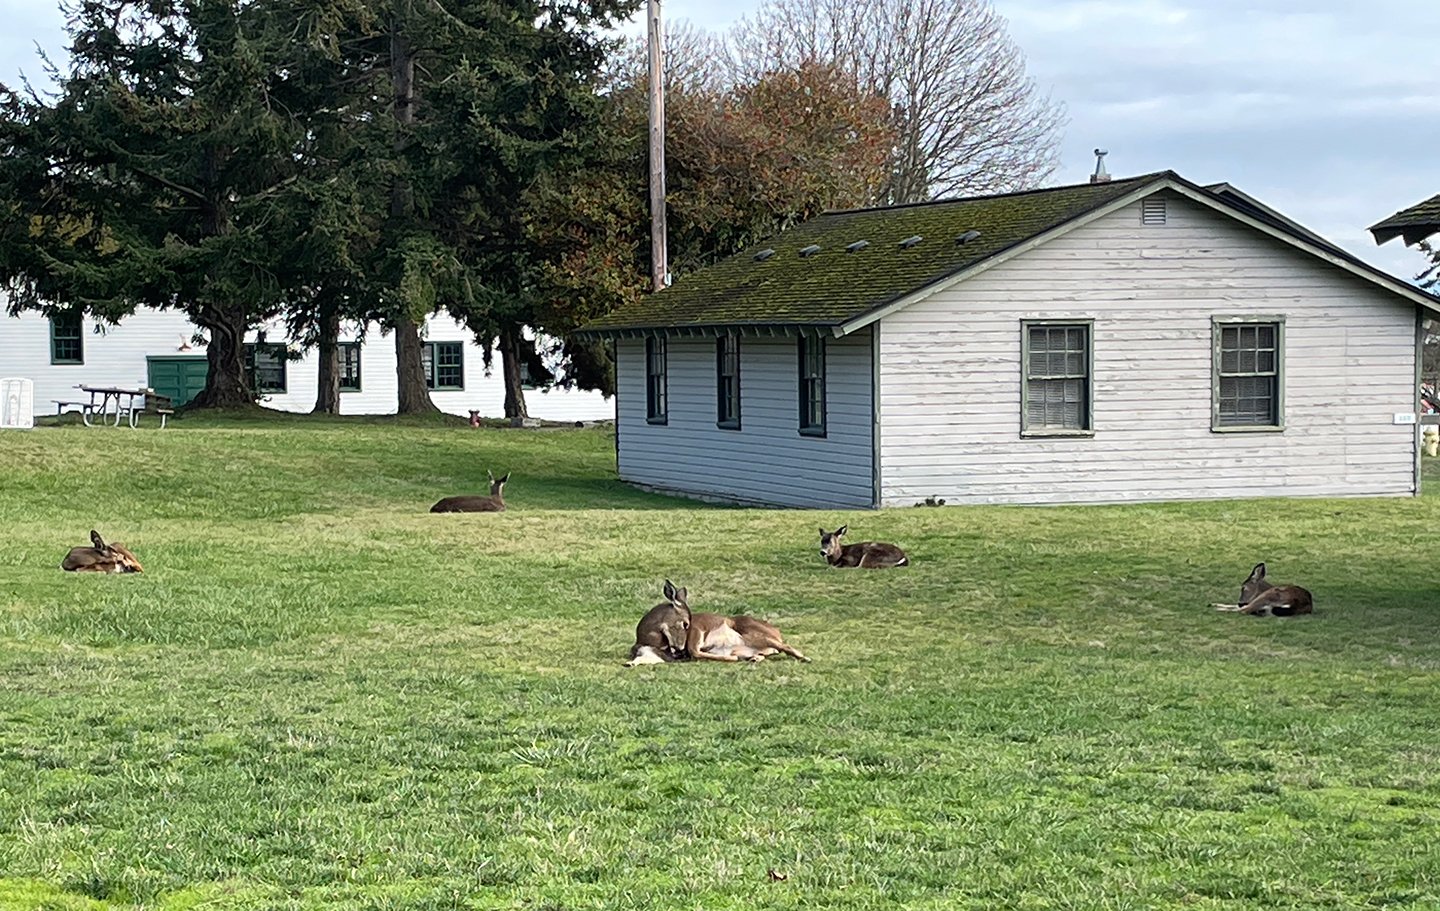    There are more deer than humans here! One afternoon, I spotted some relaxing and grooming!   